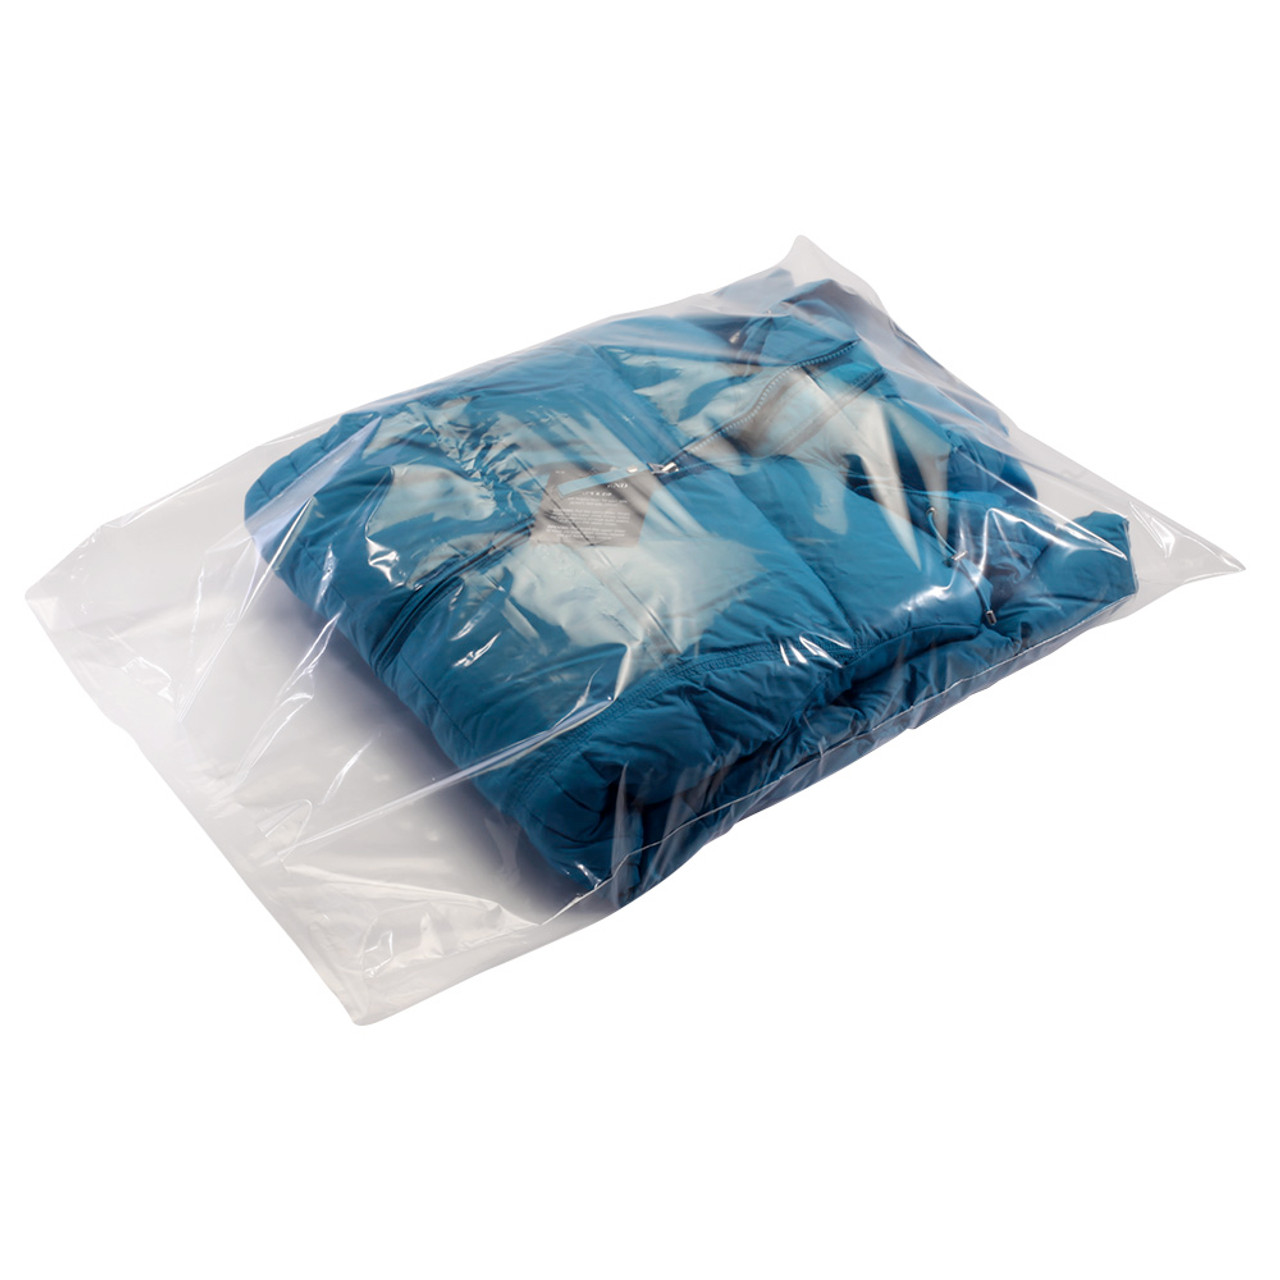 24X42 - 1.5 mil - clear - layflat poly bags - 500 bags/case